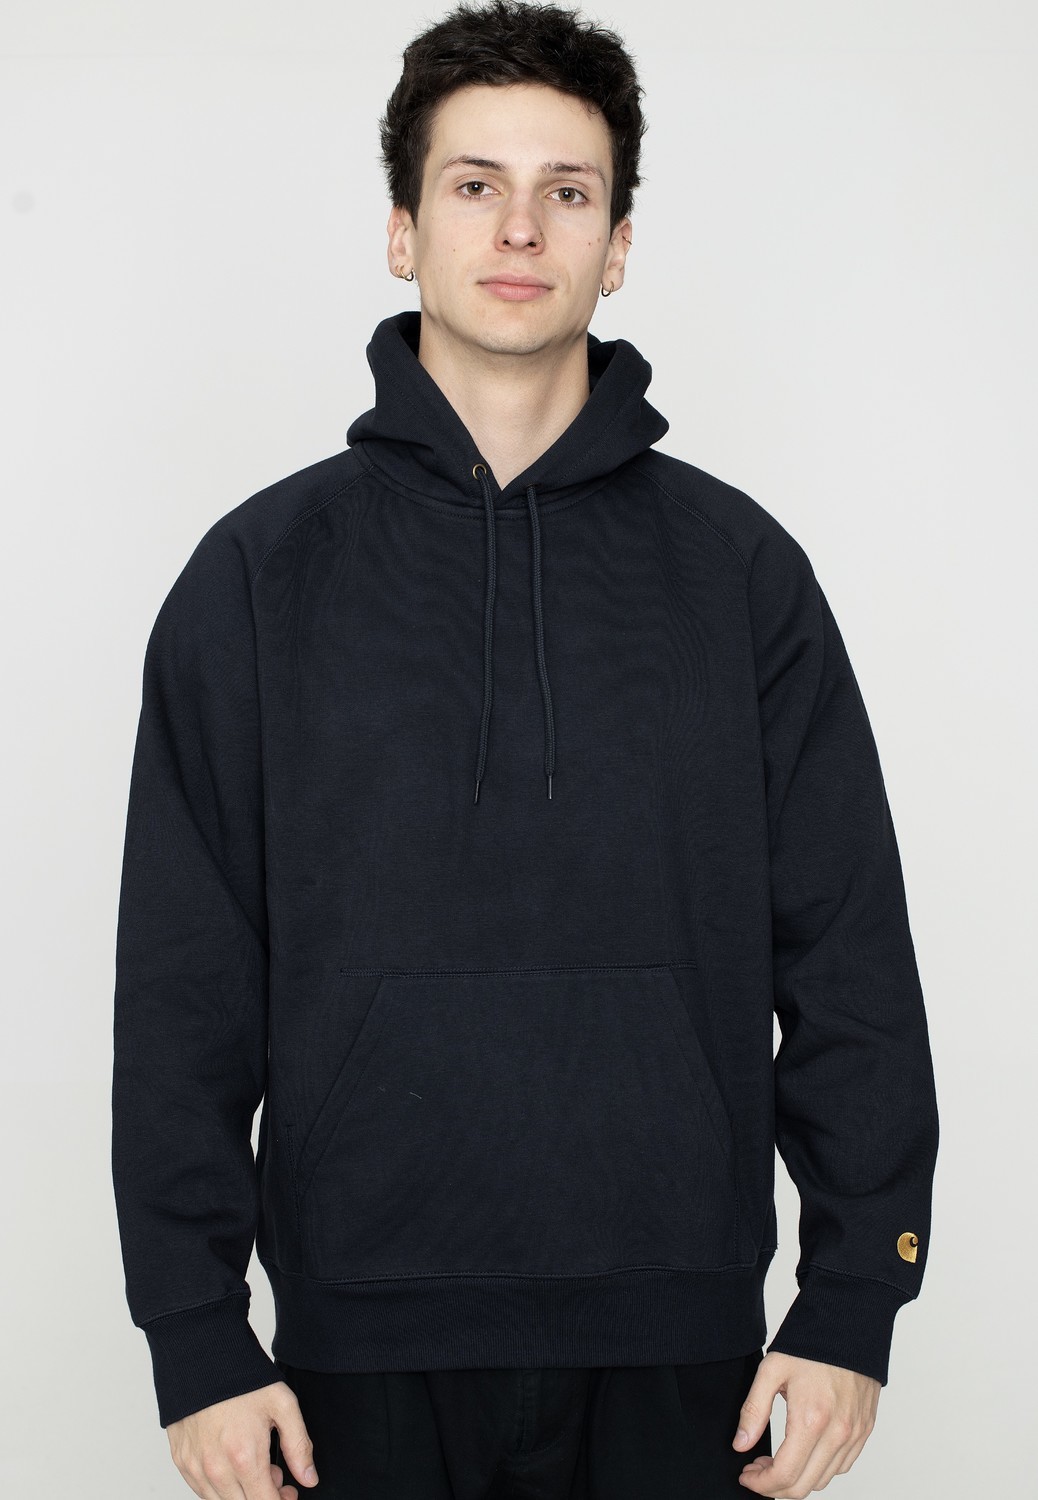 Carhartt WIP - Hooded Chase Dark Navy/Gold - Sweaters